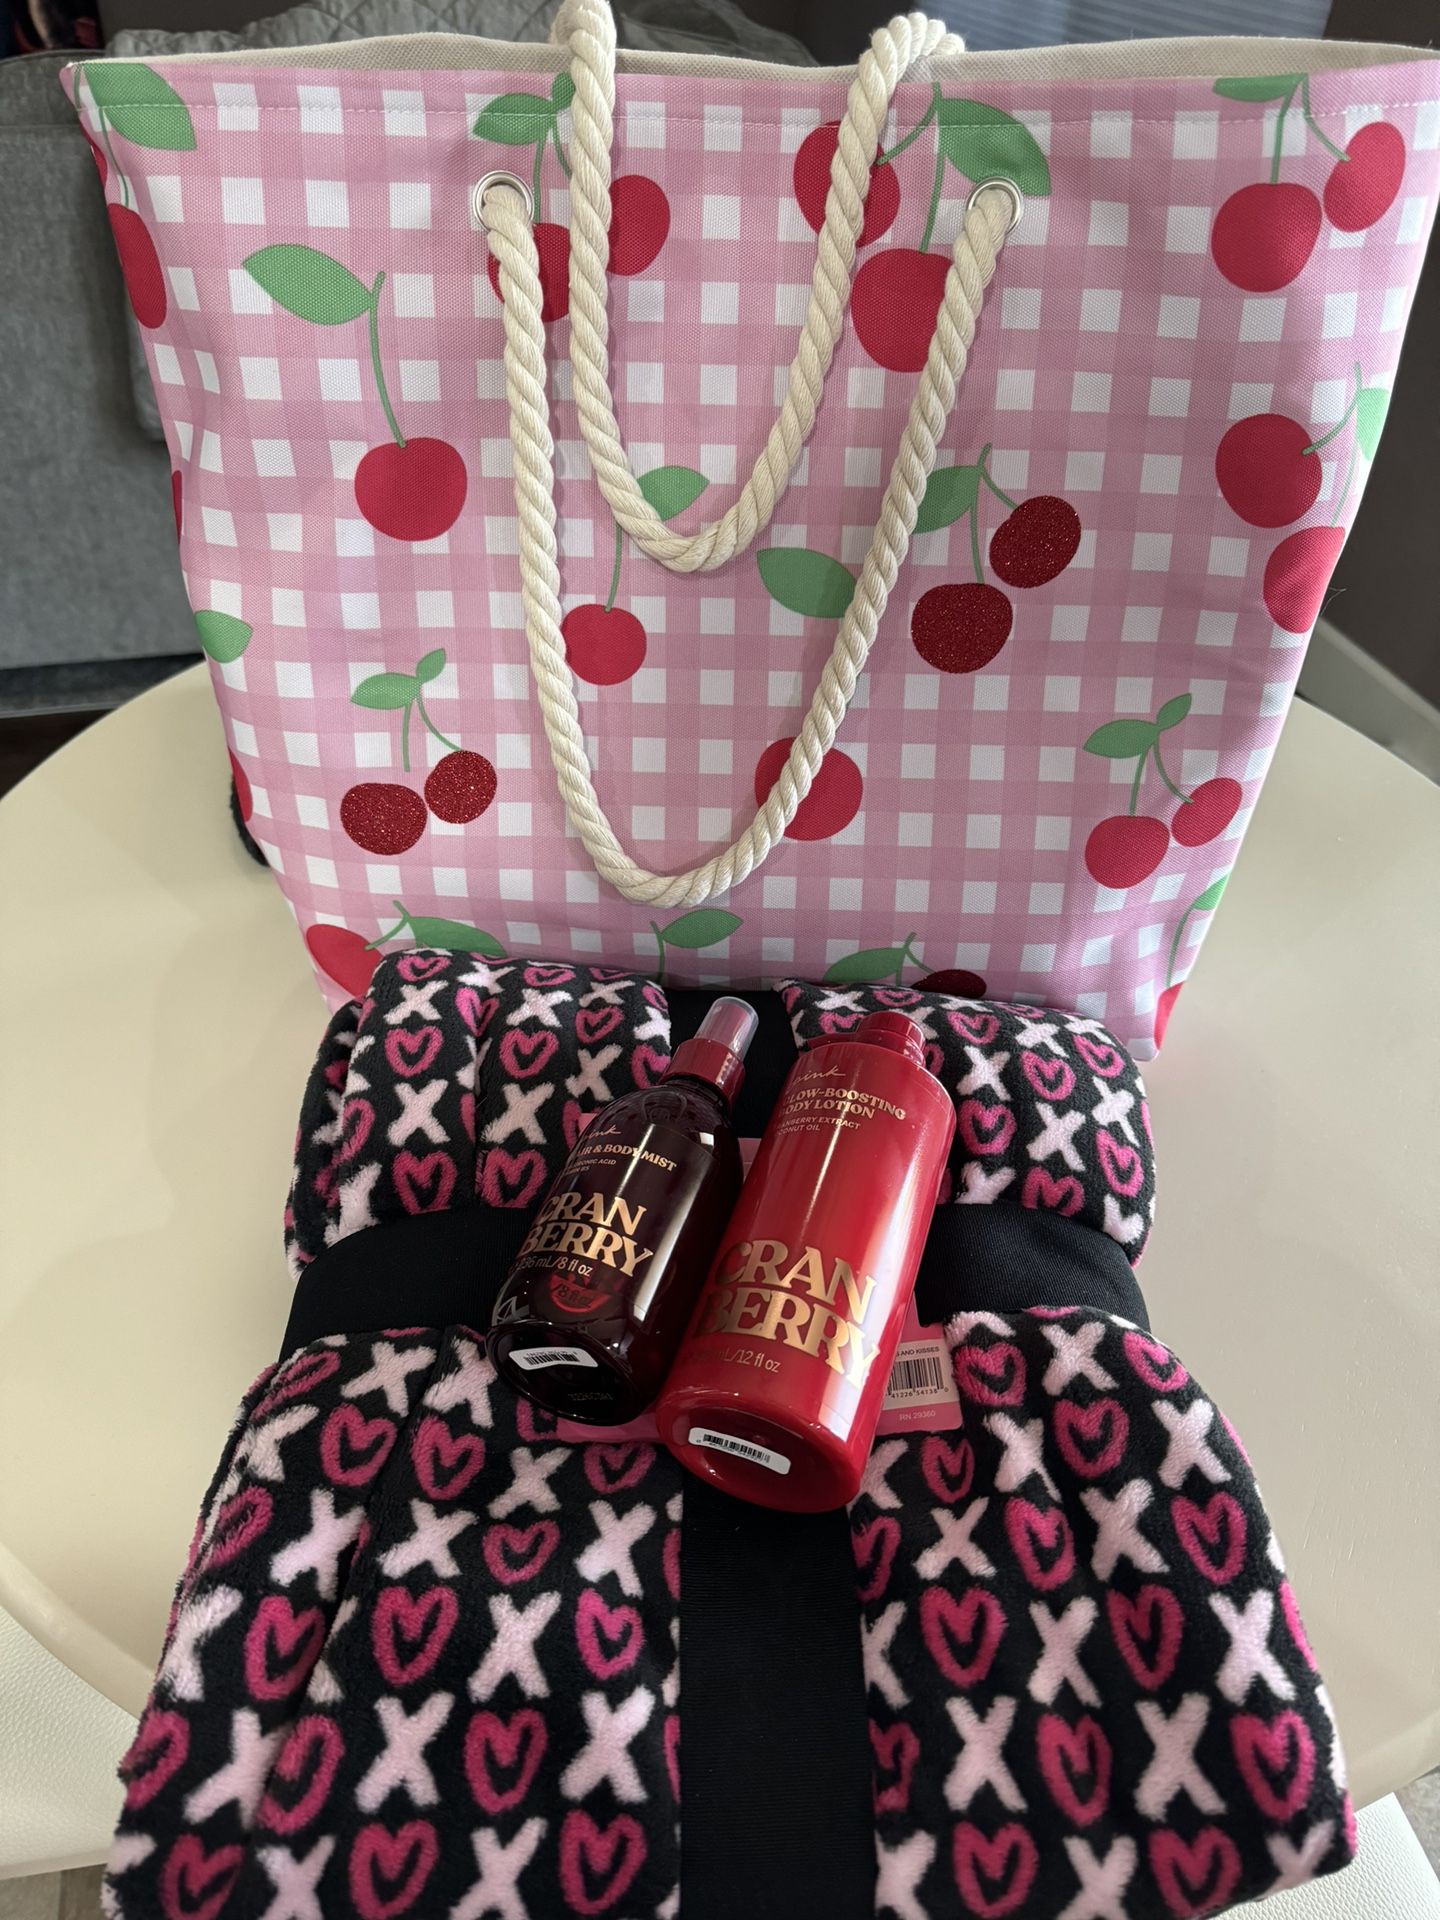 NEW VICTORIAS SECRET PINK CRANBERRY SPRAY AND LOTION SET WITH BLANKET AND TOTE $25 For All! MOTHERS DAY GIFT!